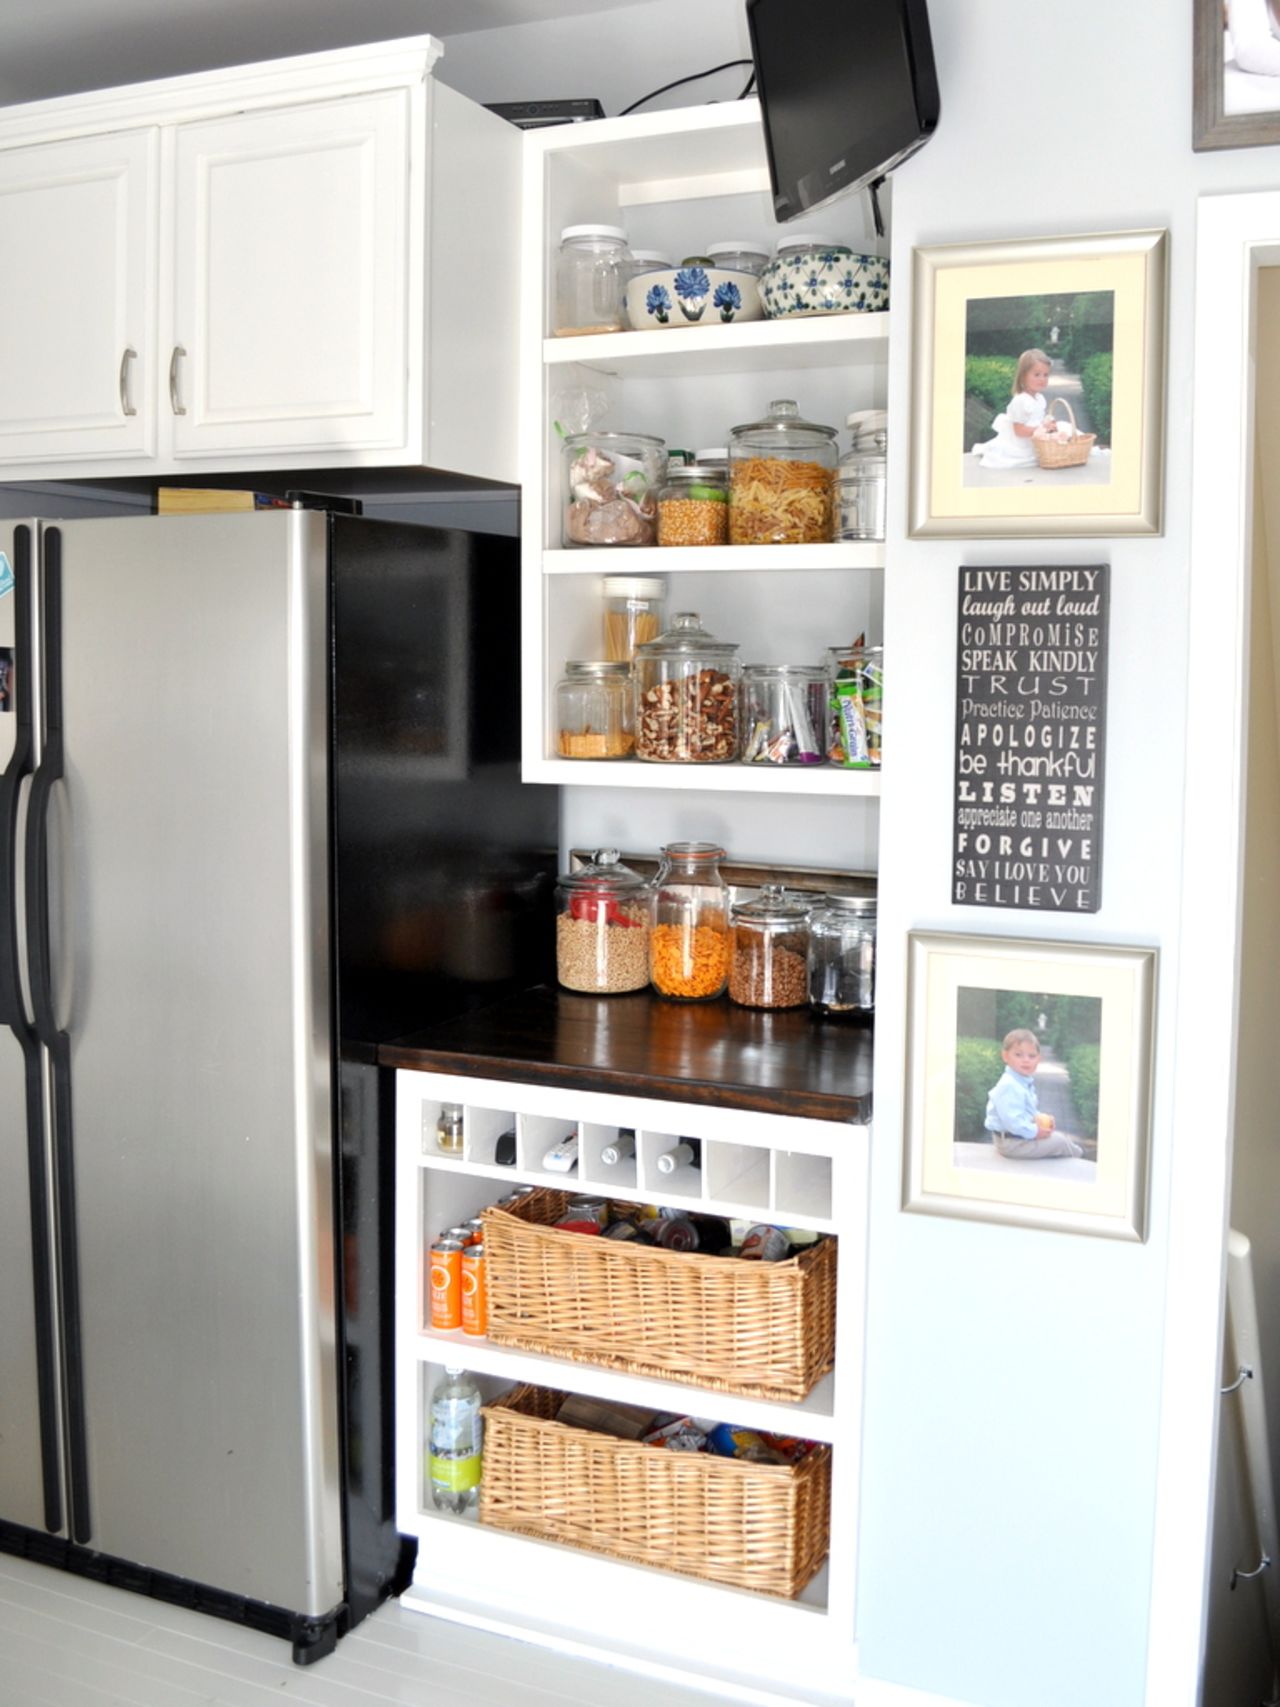 <a href="http://ireport.cnn.com/docs/DOC-1021470">Tracie Stoll'</a>s pantry uses open shelves to turn staples into decor.